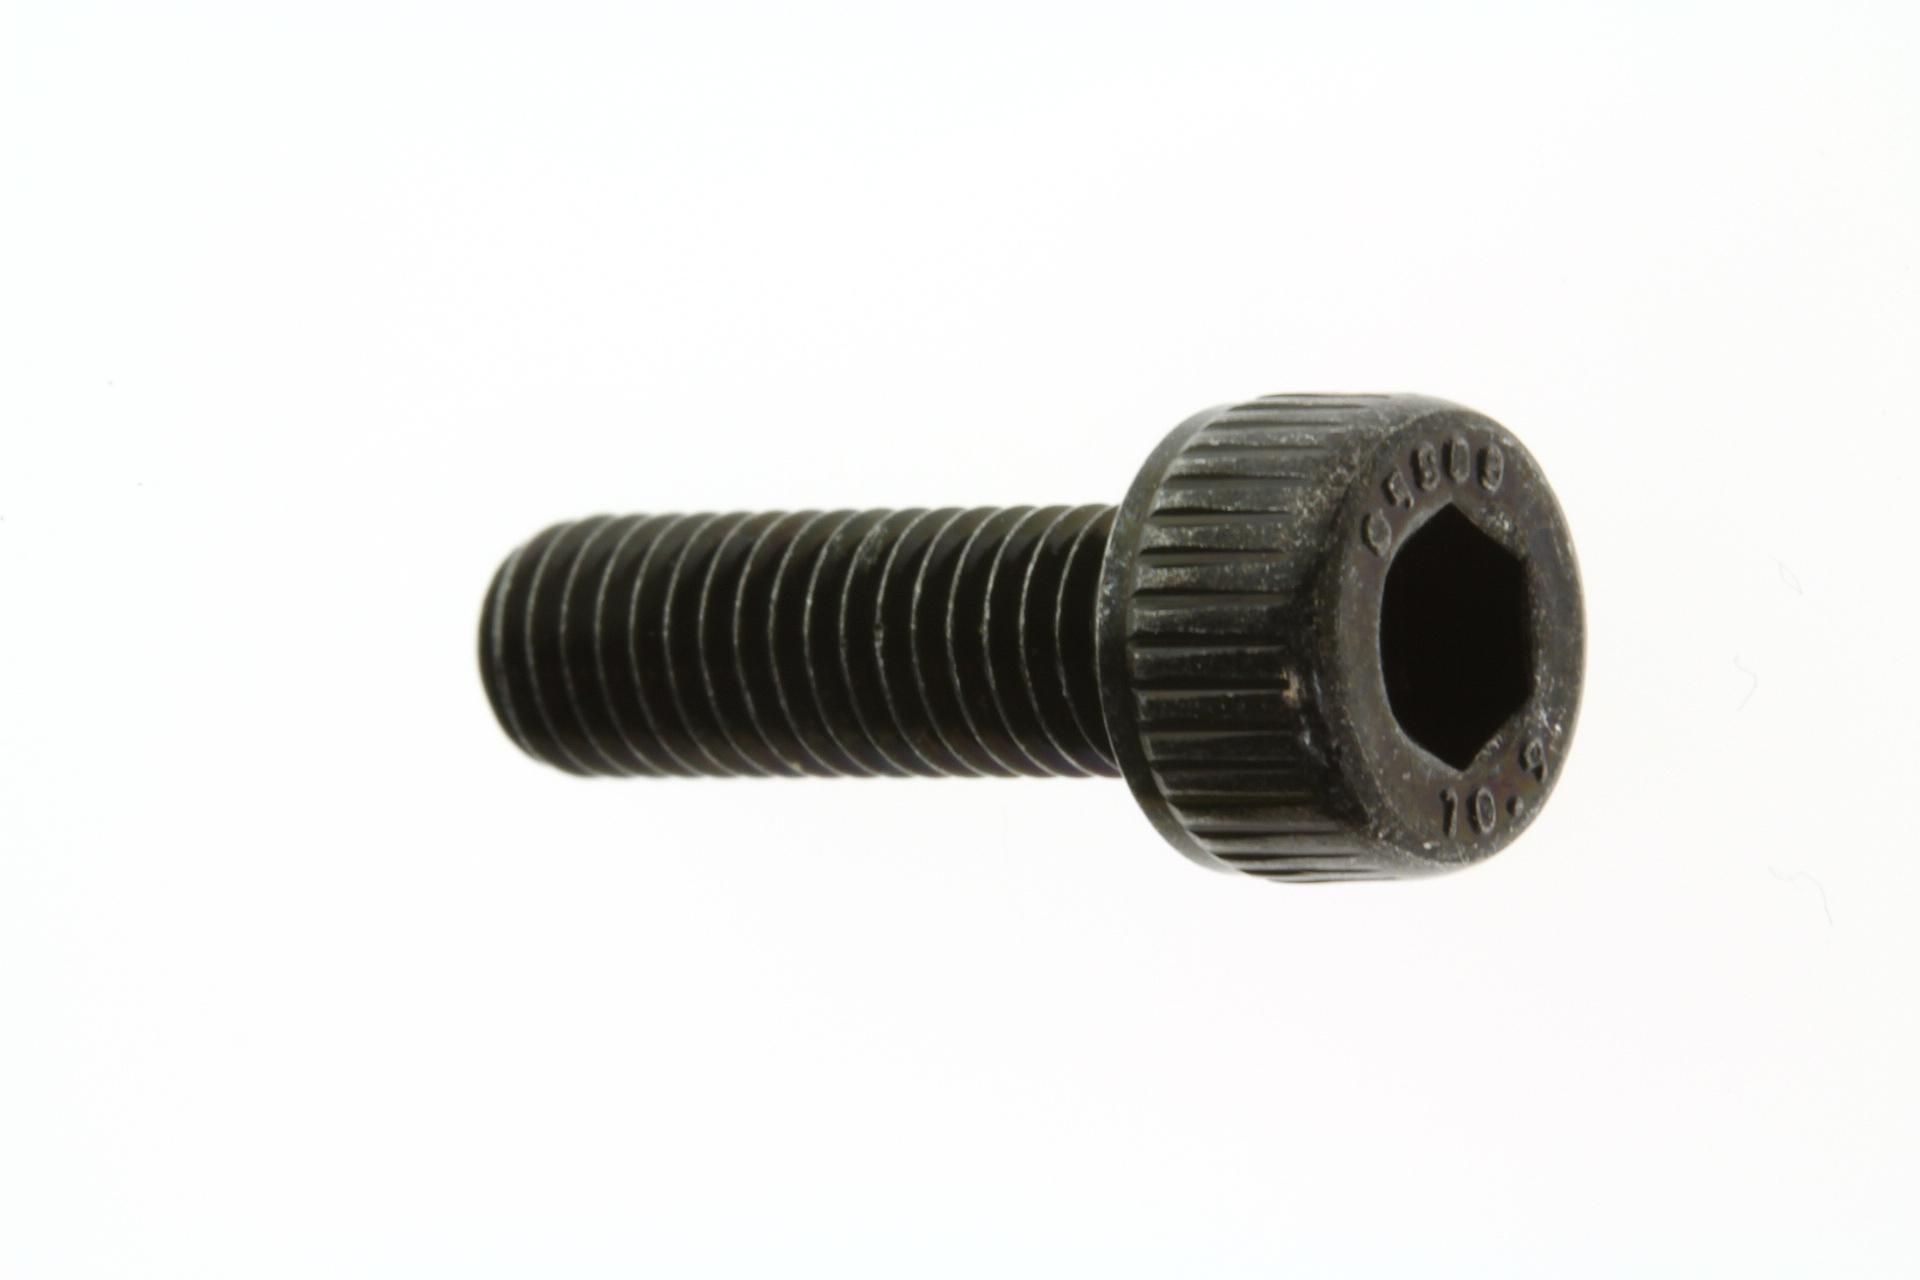 91311-05016-00 Superseded by 91317-05016-00 - BOLT, SOCKET